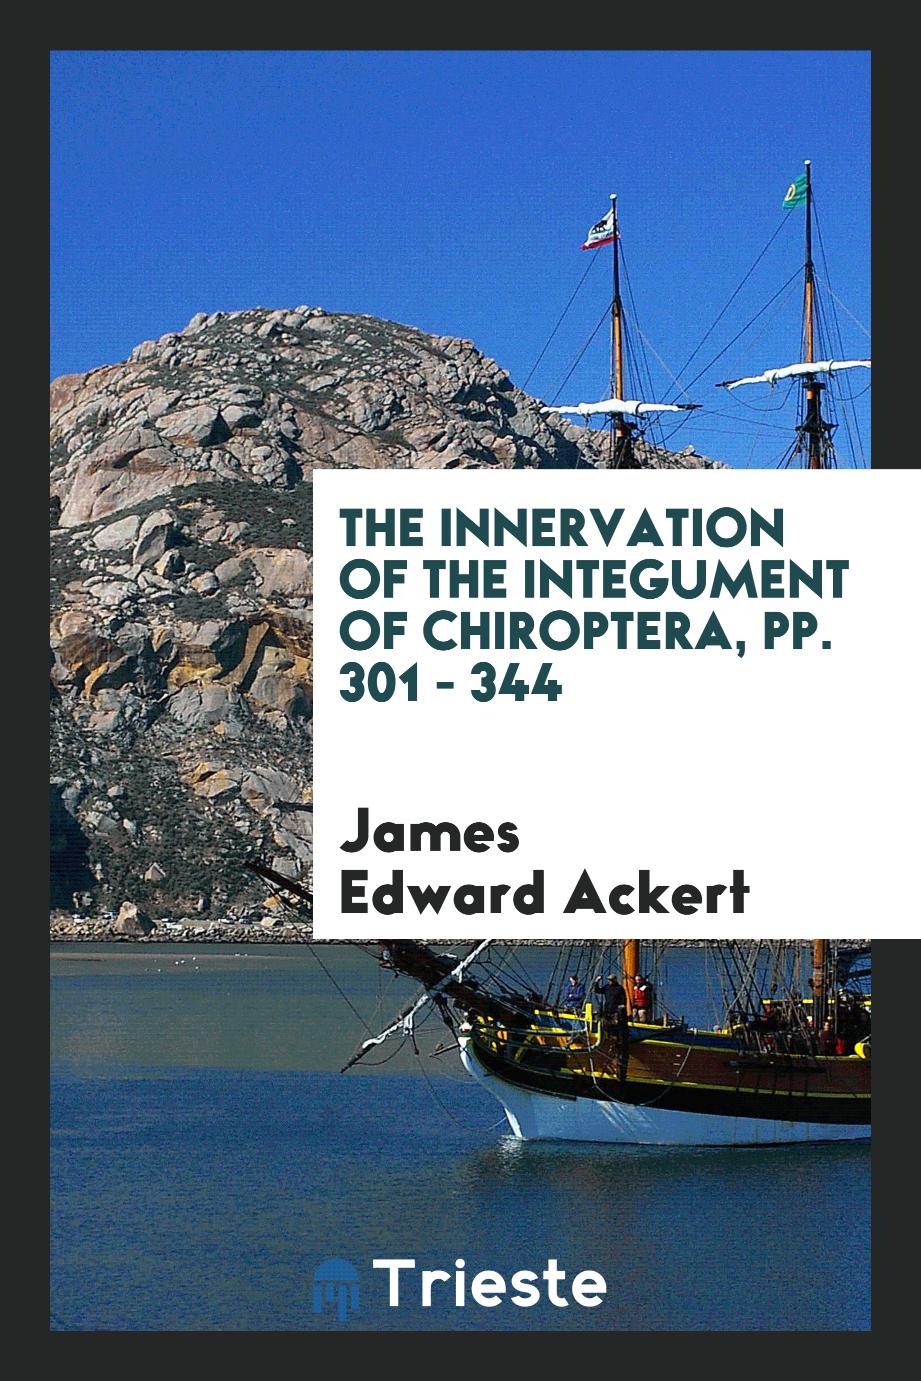 James Edward Ackert - The Innervation of the Integument of Chiroptera, pp. 301 - 344